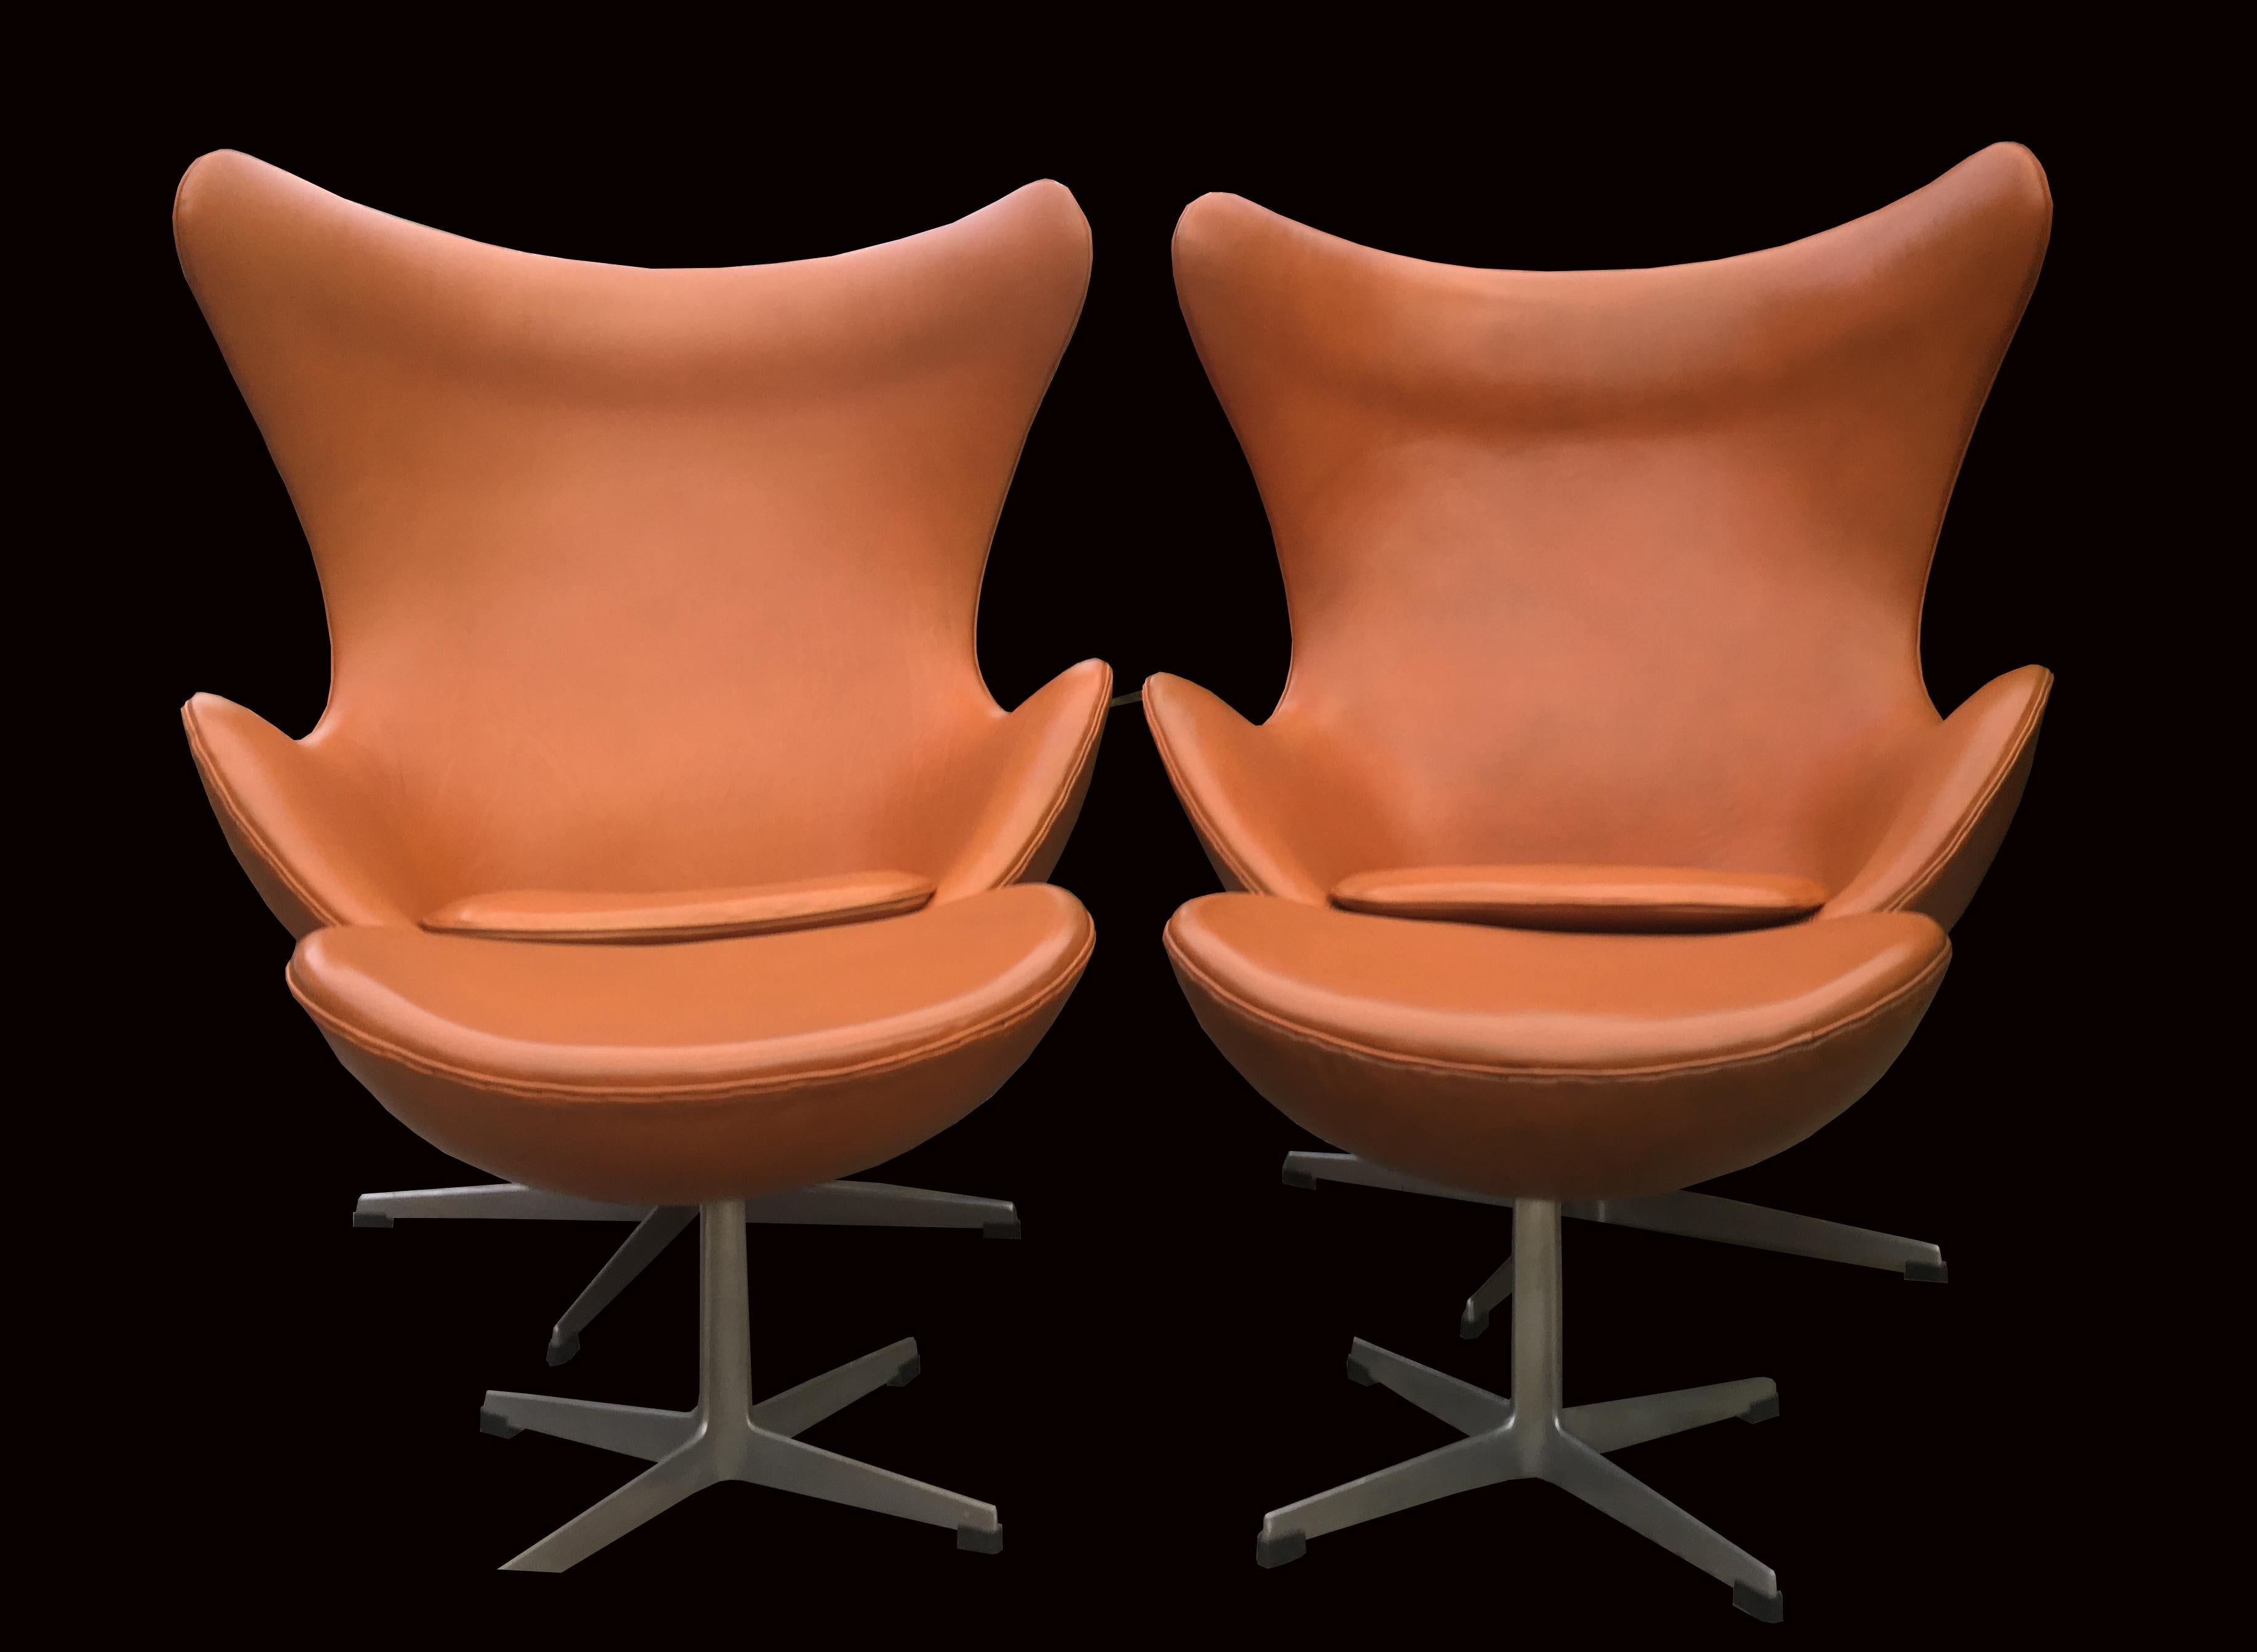 A very nice original pair of leather egg chairs with their matching ottomans, designed by Arne Jacobsen, originally for the reception of the Radisson SAS hotel in Copenhagen in 1956, and produced by Fritz Hansen, all in very good condition.